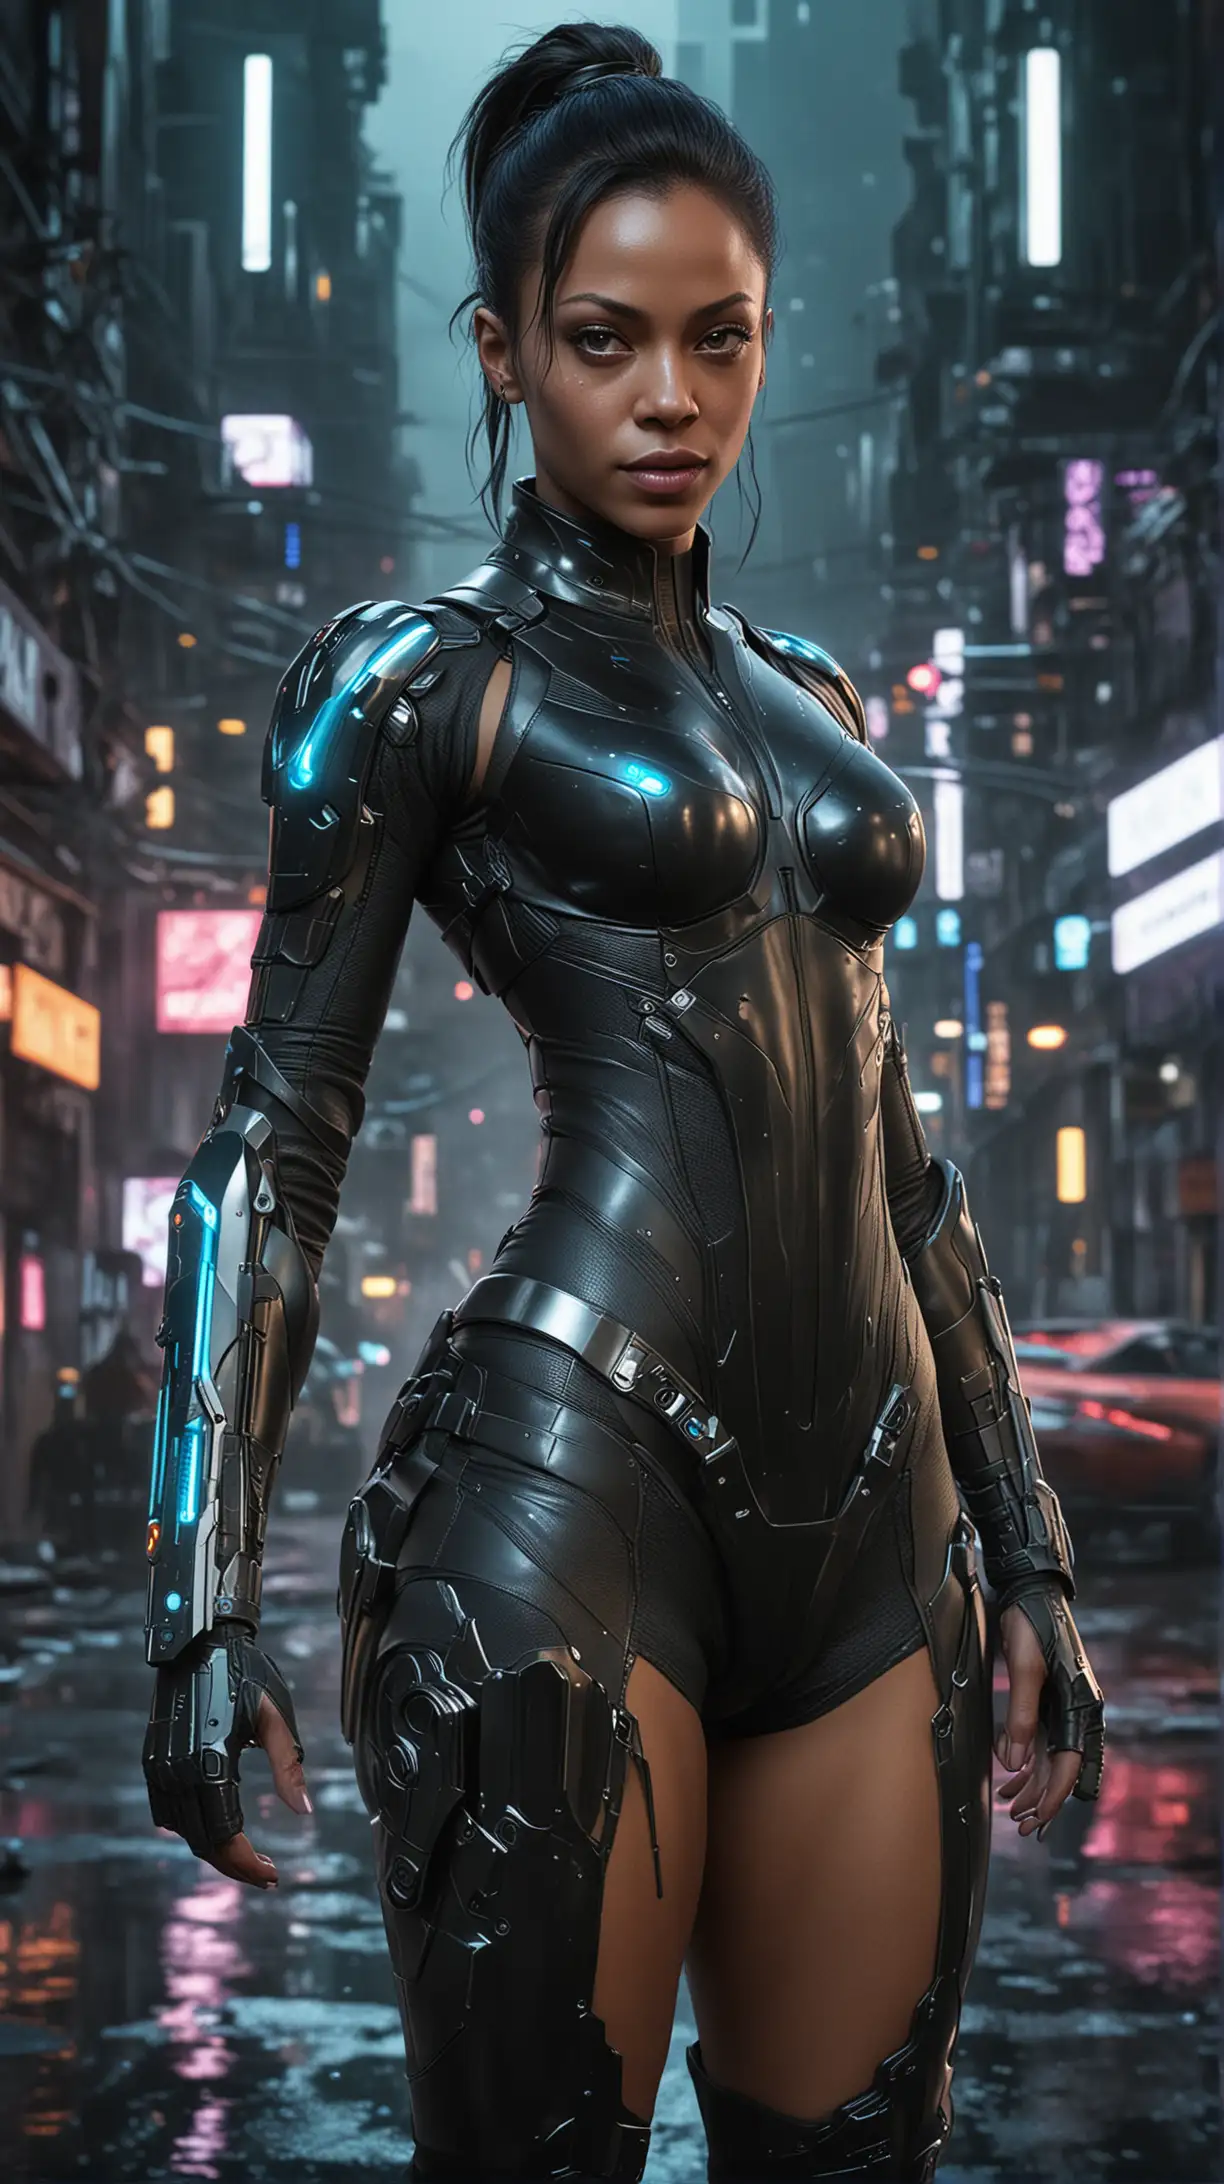 Create a visually striking nude image of Lira Vox, a character inspired by the likeness of Zoe Saldana, set against the vibrant, chaotic backdrop of Night City from Cyberpunk 2077. Lira Vox is a sleek, agile cybernetic operative known for her quick reflexes and sharp mind. Her character should embody a blend of elegance and edginess, with facial features that mirror Zoe Saldana's distinct and expressive eyes, high cheekbones, and confident demeanor. Her hairstyle is a futuristic undercut with glowing fiber-optic strands interwoven through jet-black hair, which illuminates her movements with a subtle, colorful glow.

Lira's body features advanced cybernetic enhancements that emphasize her role as a stealth and reconnaissance expert. These enhancements include a right arm that is sleekly designed with integrated tools for hacking and combat, and her legs are augmented for enhanced speed and agility, enabling breathtaking leaps and sprints. Her eyes are equipped with dynamic scanning implants that shimmer with an electric blue hue, providing her with critical data overlays and the ability to see in various spectrums.

Her attire is a custom-designed tactical suit that combines high-tech armor with flexible materials, allowing for maximum mobility while providing protection. The suit should be adorned with reactive lighting that changes color based on her operational status, ranging from stealthy blacks and grays to warning reds. Add details like a compact utility belt filled with gadgets, encrypted data drives, and a silent but deadly energy blade that sheaths at her wrist.

The scene around Lira is quintessentially cyberpunk, showcasing Night City's dense urban sprawl, filled with towering digital billboards, neon lights casting vibrant reflections on wet asphalt,